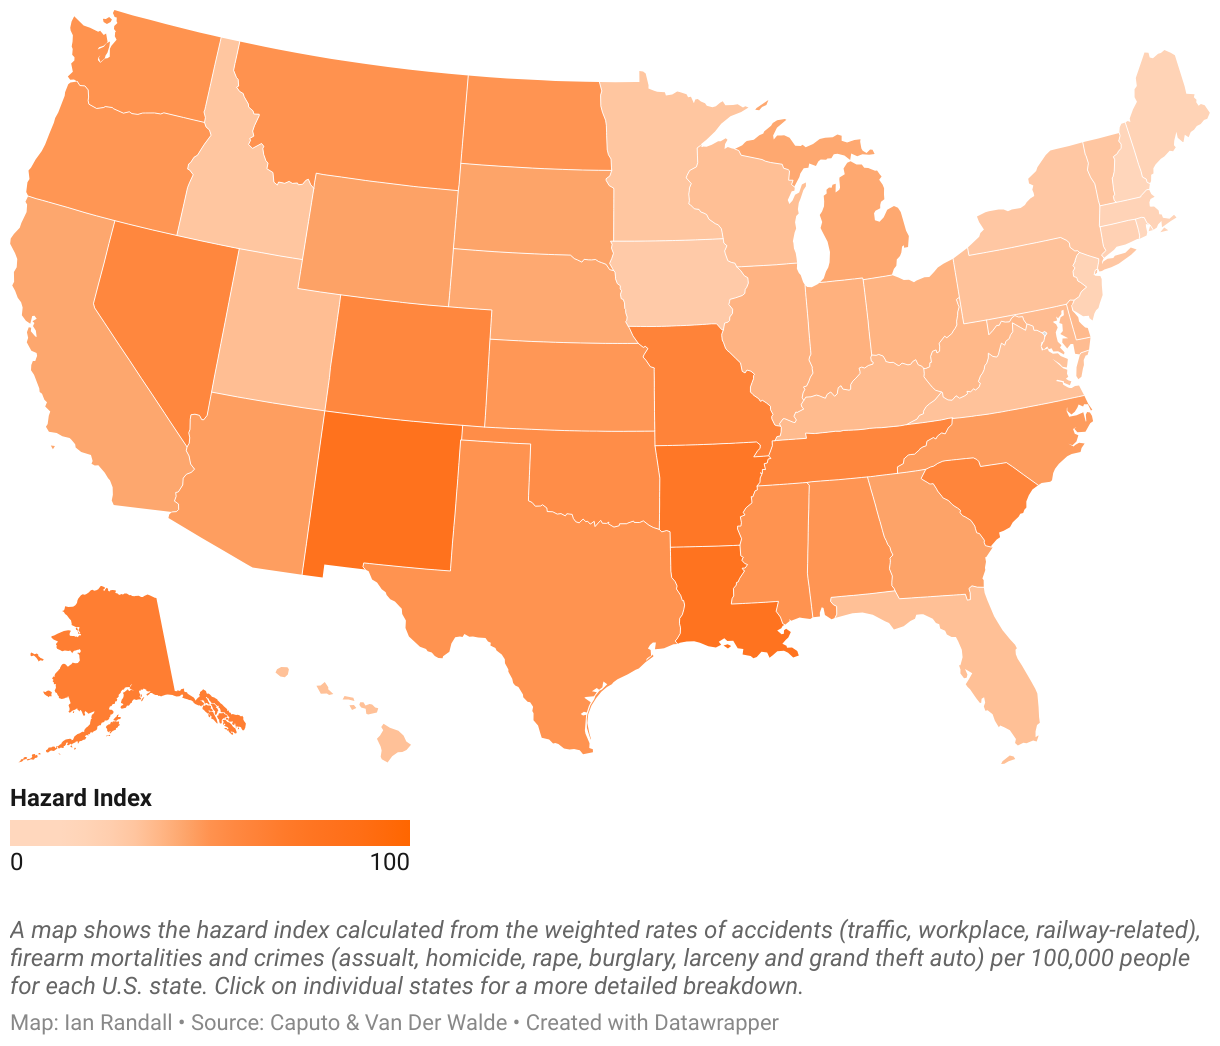 A map shows the hazard index calculated from the weighted rates of accidents (traffic, workplace, railway-related), firearm mortalities and crimes (assualt, homicide, rape, burglary, larceny and grand theft auto) per 100,000 people for each U.S. state.